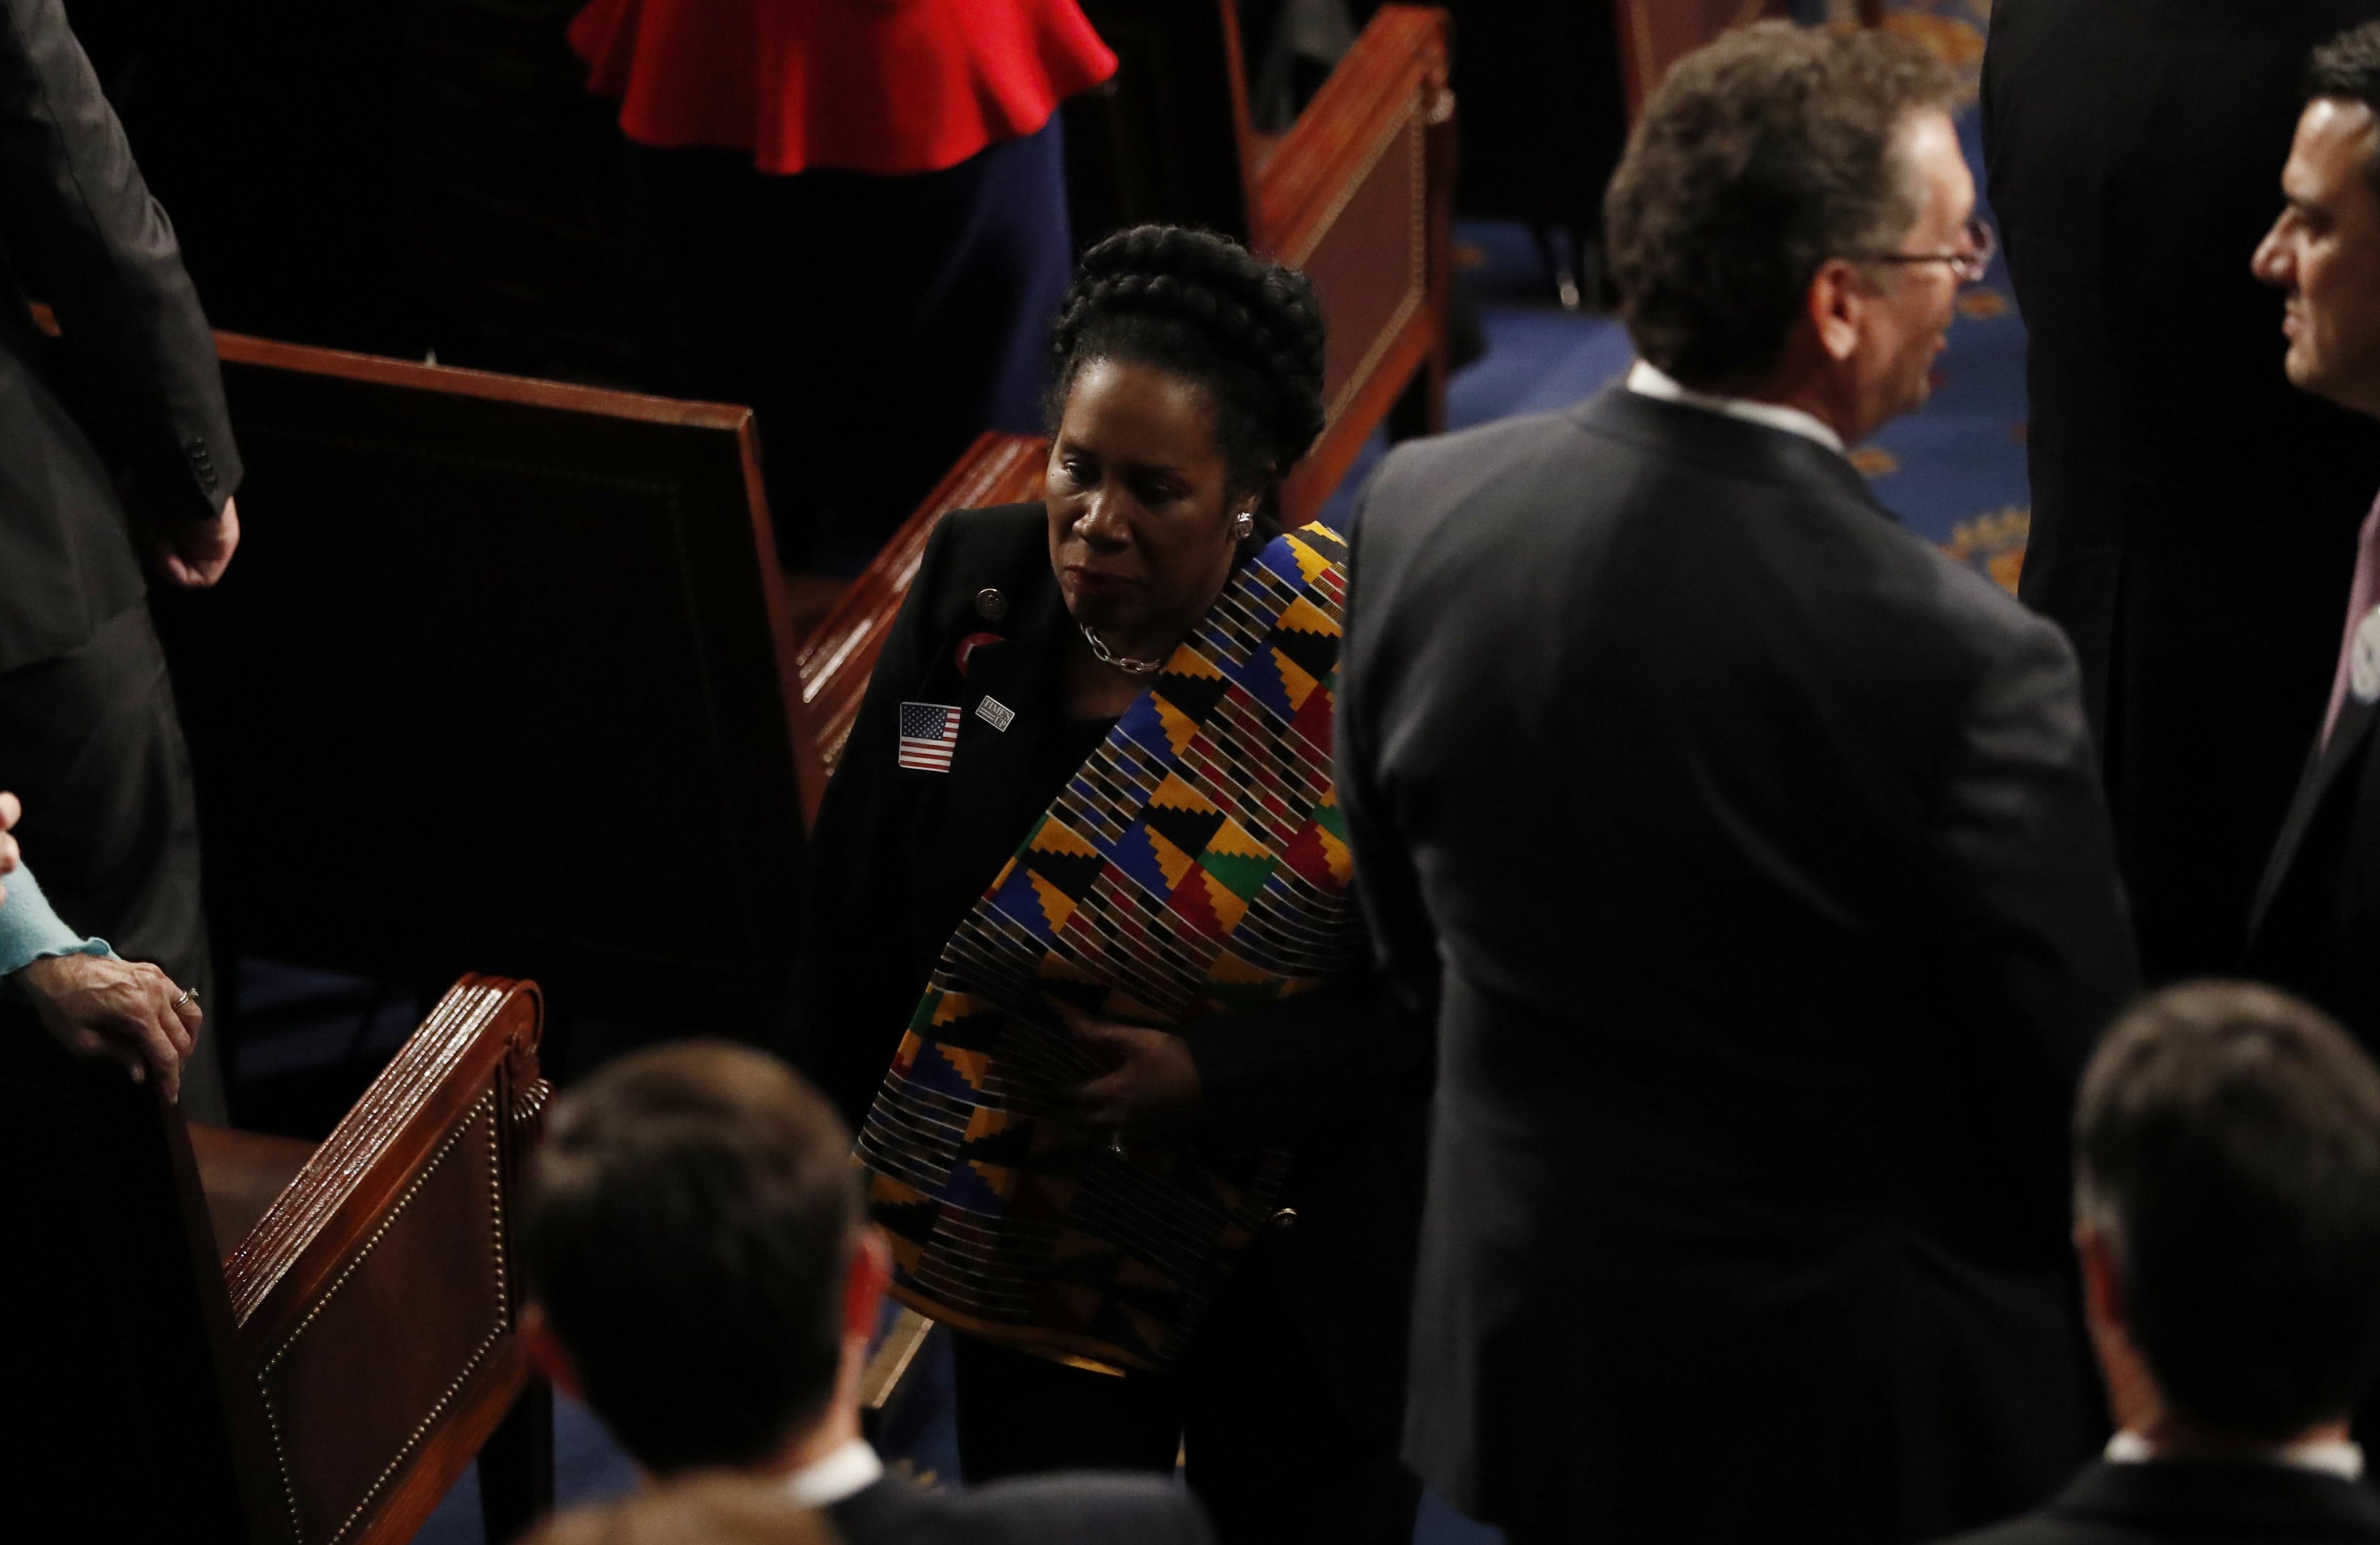 Democratic Rep Sheila Jackson Lee walks out on President Trump’s State of the Union address in Washington